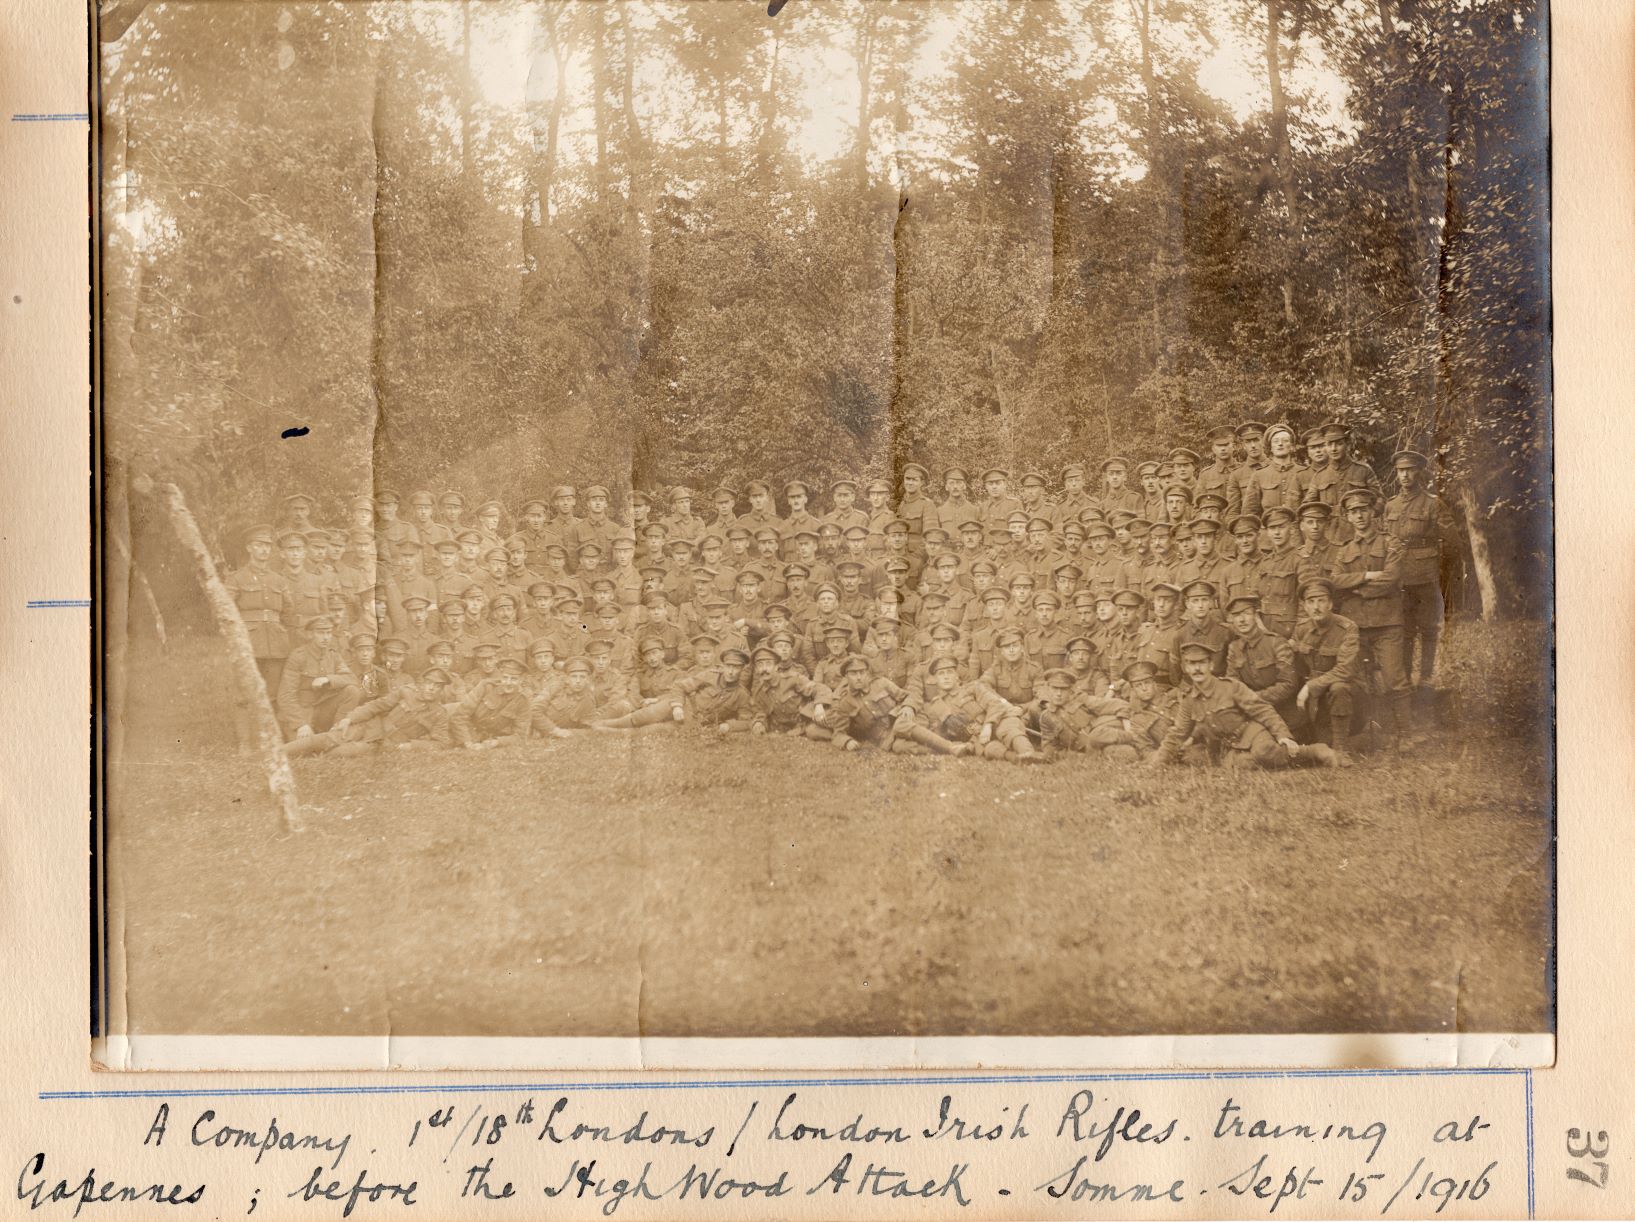 A Company, 1st/18th Londons / London Irish Rifles, training at Gapennes, before the High Wood attack, Somme, September 15th, 1916